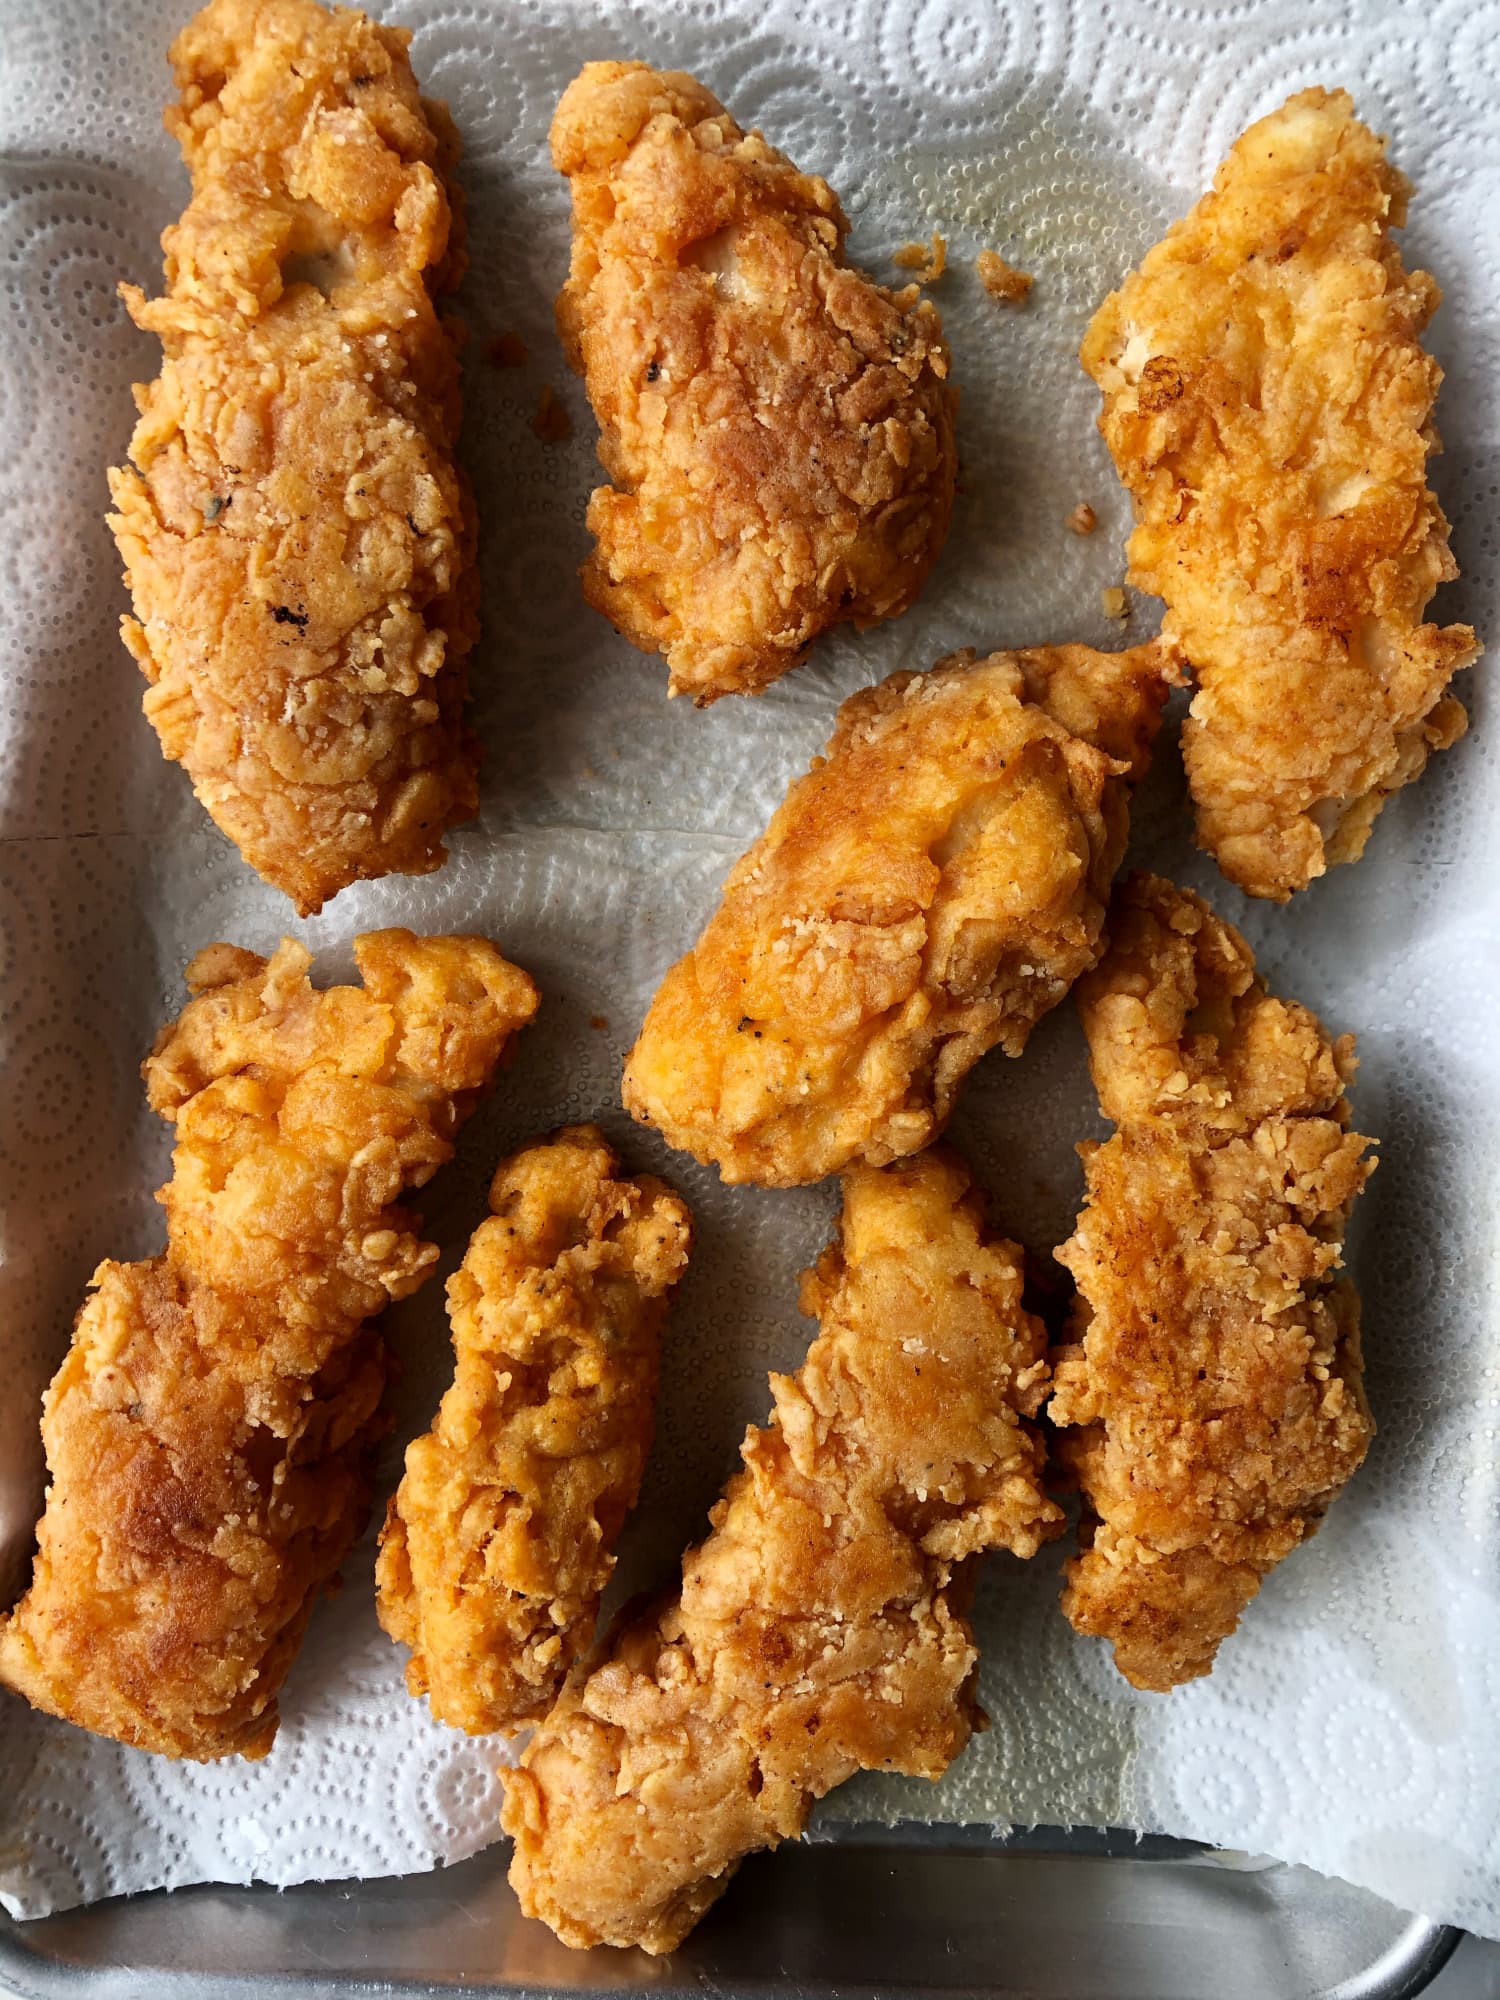 I Tried the Popular “Double-Dredged” Chicken Tenders, and I’ll Never Make Them Any Other Way